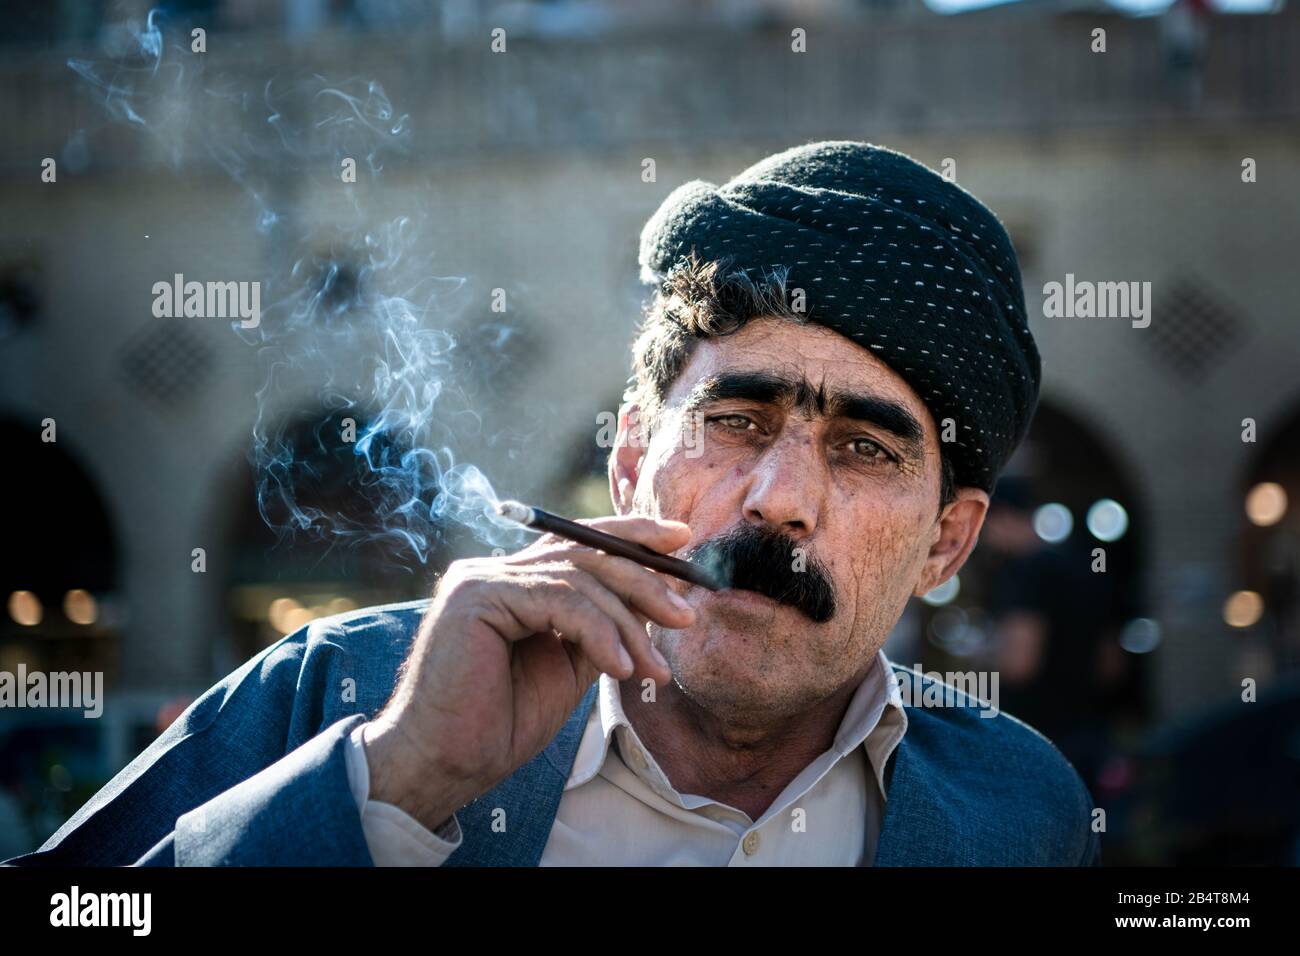 Iraq, Iraqi Kurdistan, Arbil, Erbil. Portrait of a iraqi kurdish man on the park Shar. Smoke from his cigarette is coming out from his mouth. He's wea Stock Photo